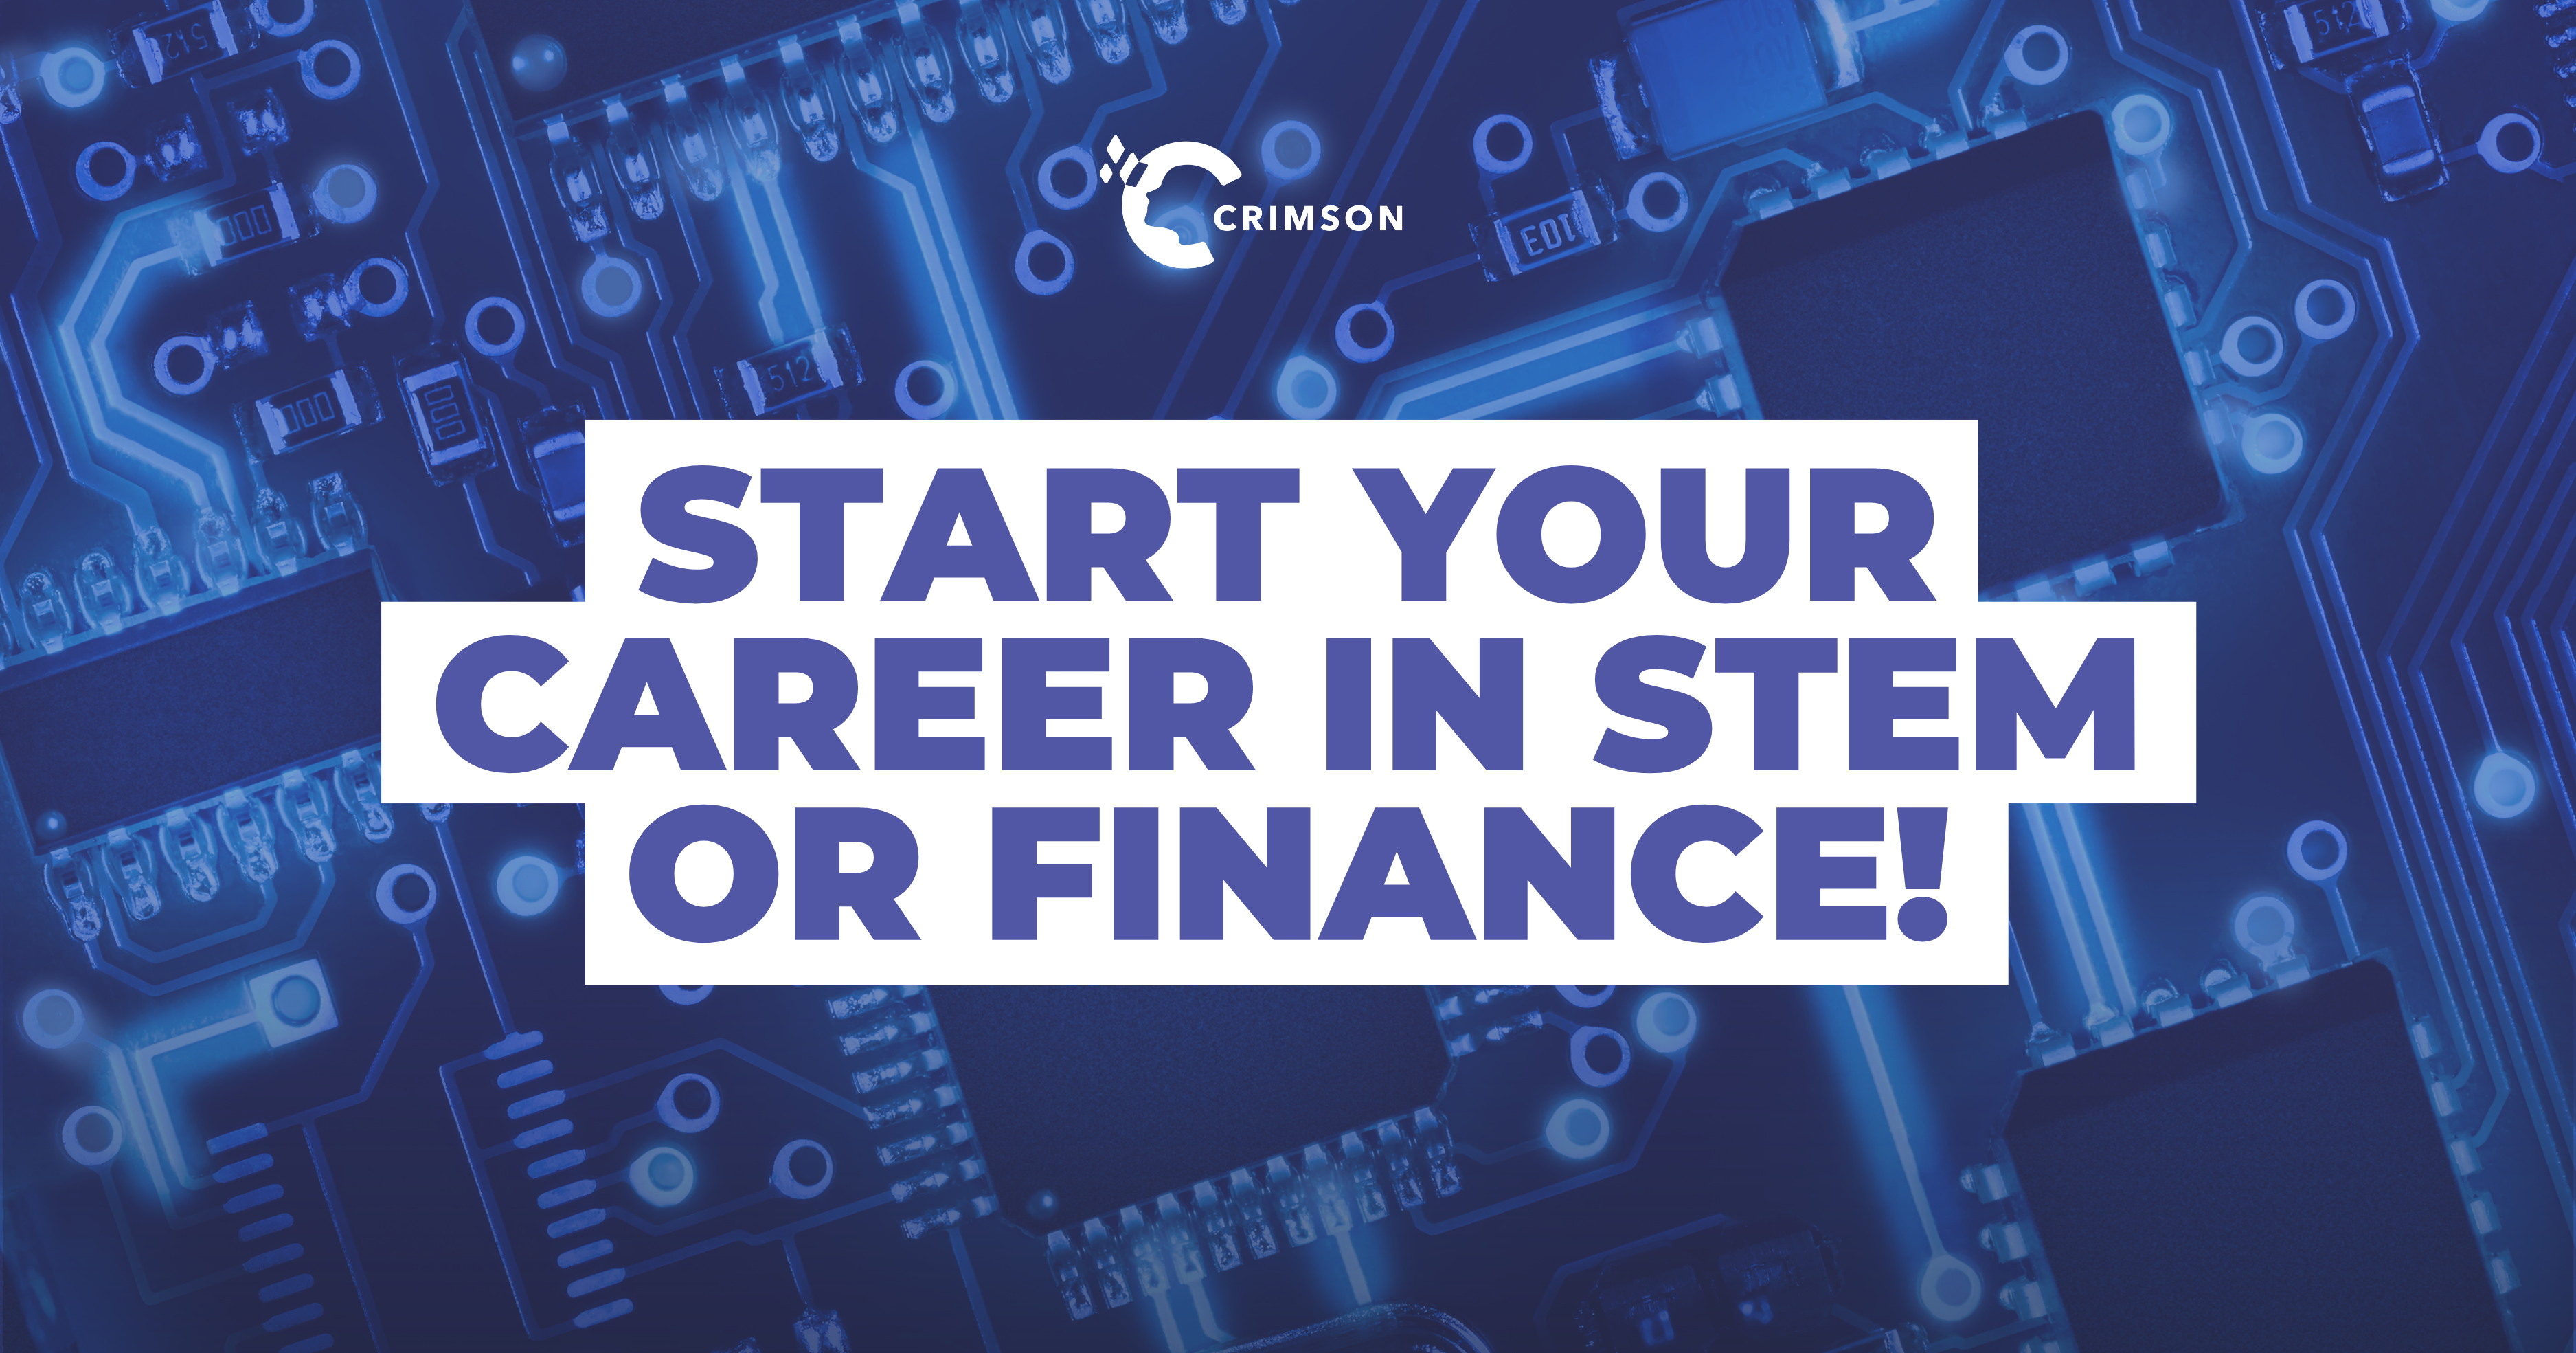 Careers Webinar: Discover How To Increase Your Chances Of An Admission With A STEM or Finance Internship!